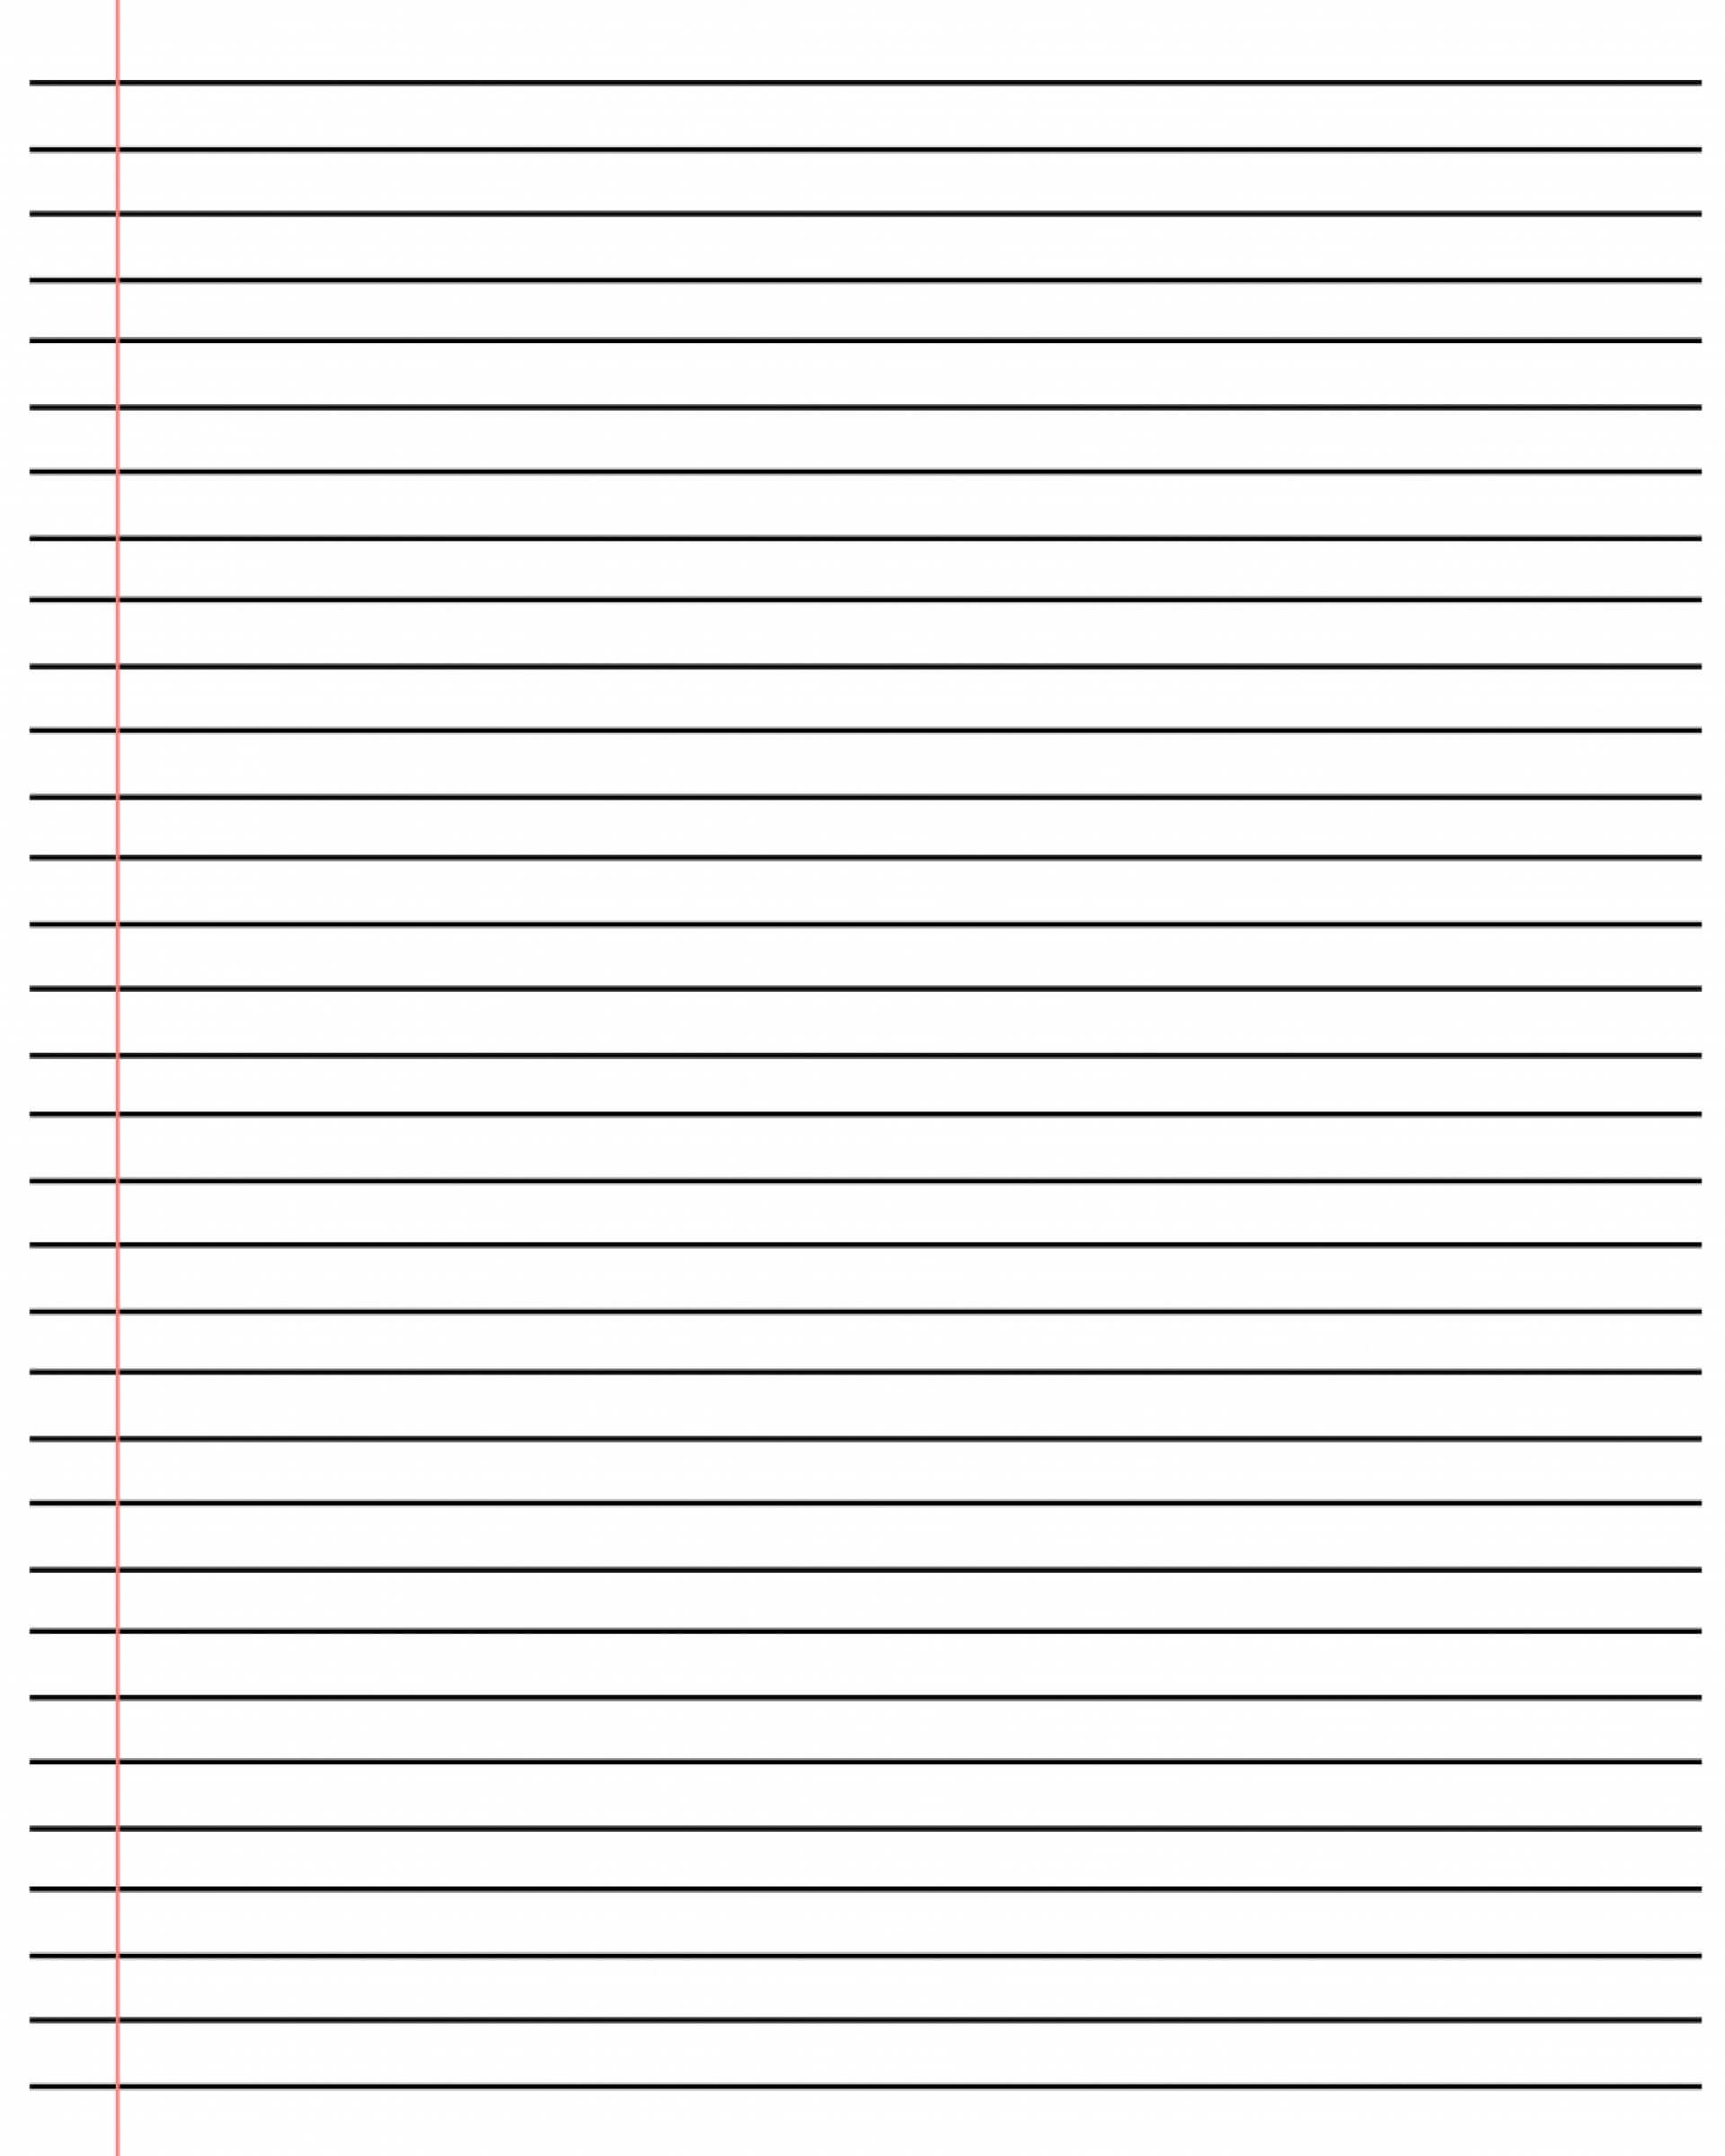 042 Printable Lined Paper College Ruled Awesome Image With In College Ruled Lined Paper Template Word 2007